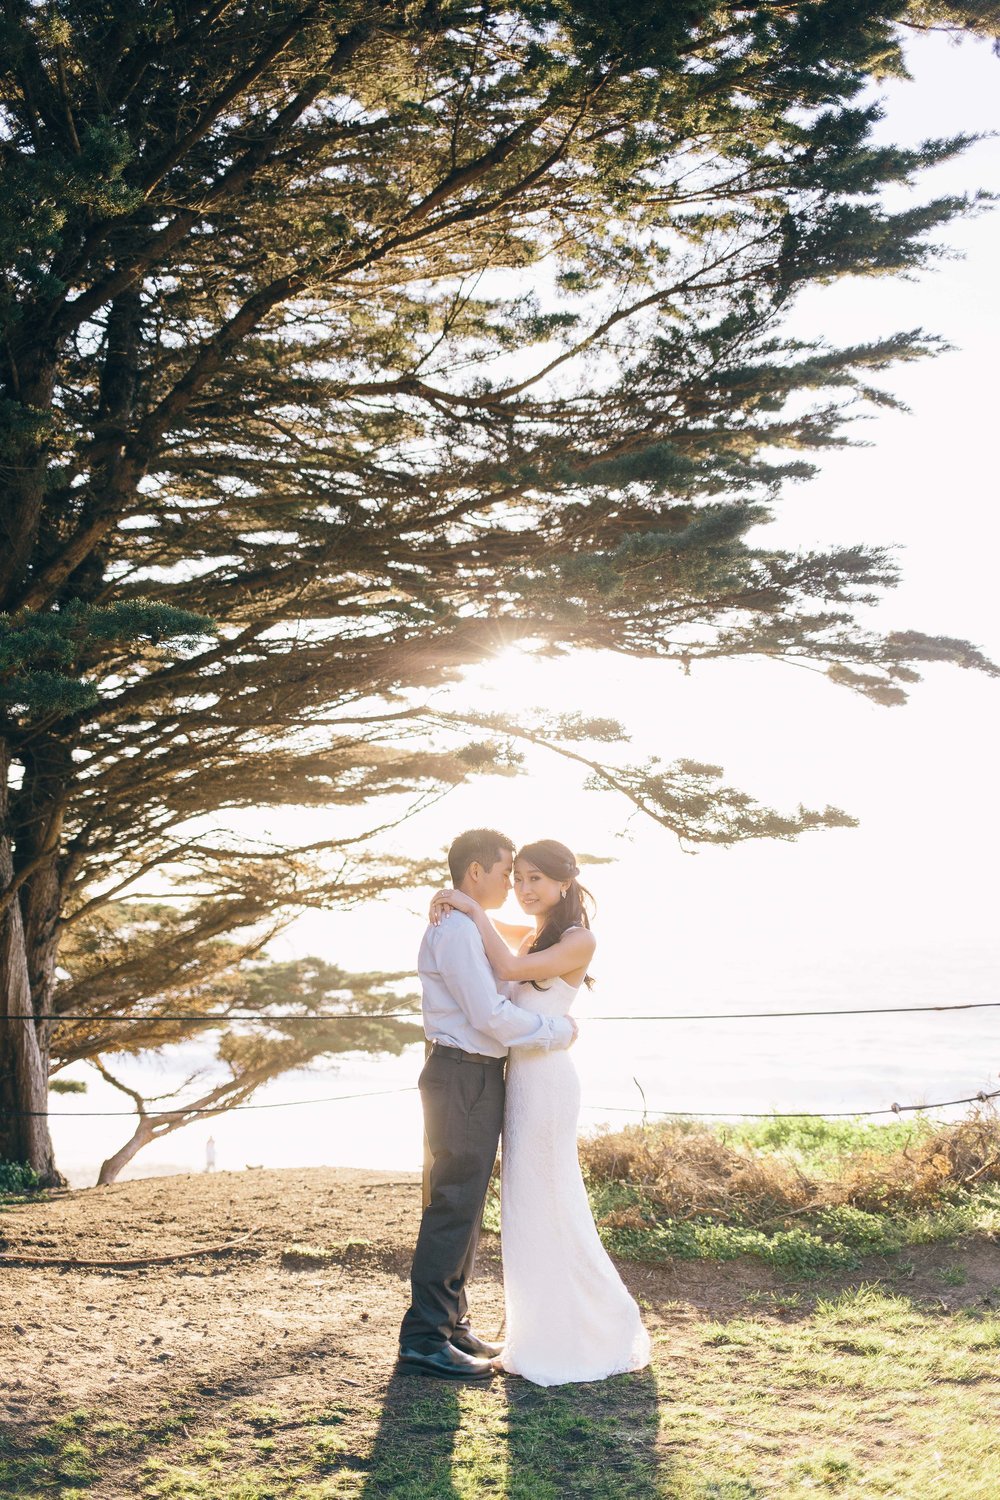 Best Engagement Photo Locations in San Francisco - Baker Beach Engagement Photos by JBJ Pictures (12).jpg